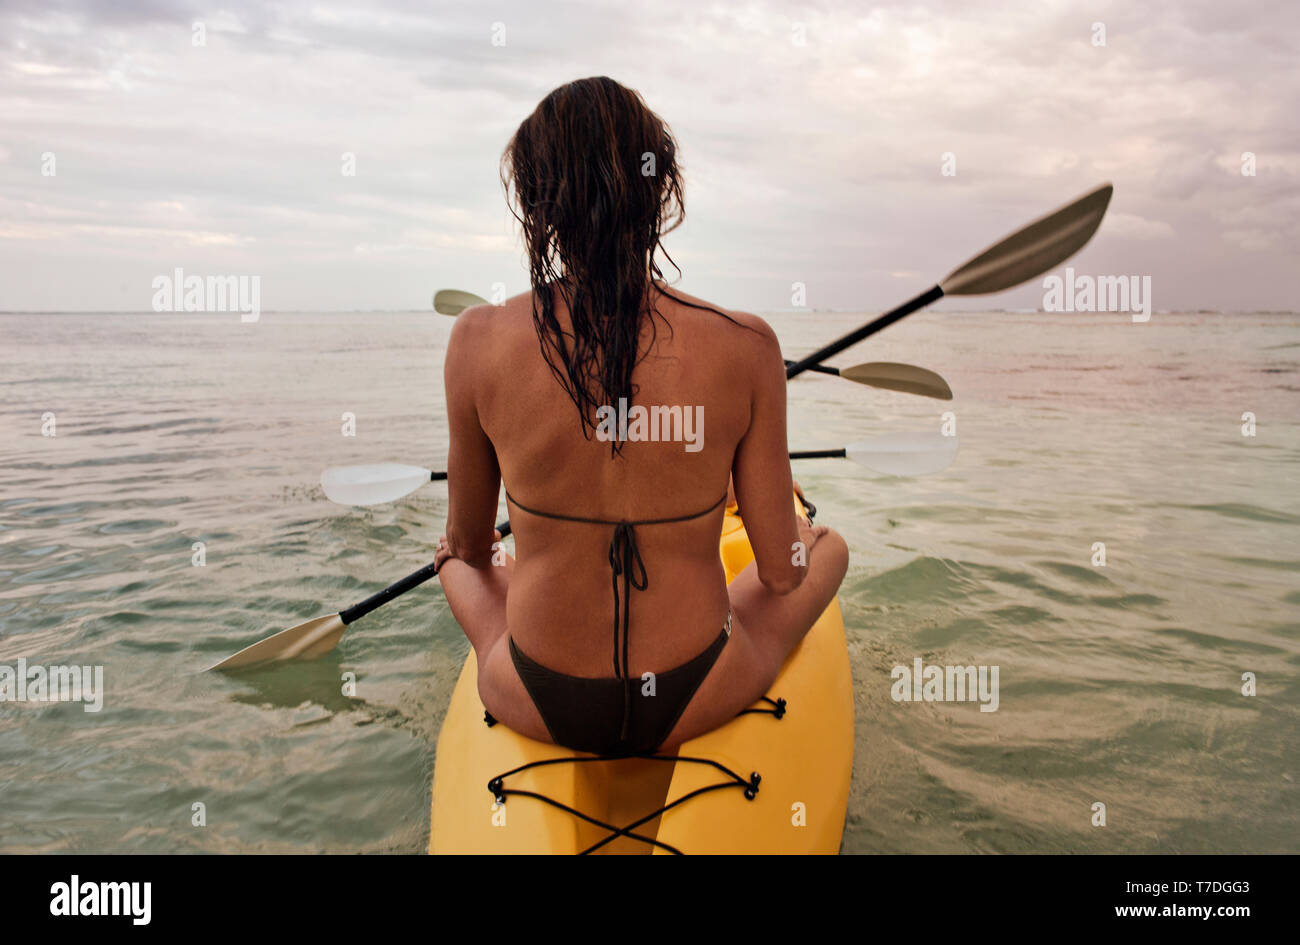 Mid adult woman wearing a bikini while sitting at the end of a sea kayak in the ocean. Stock Photo